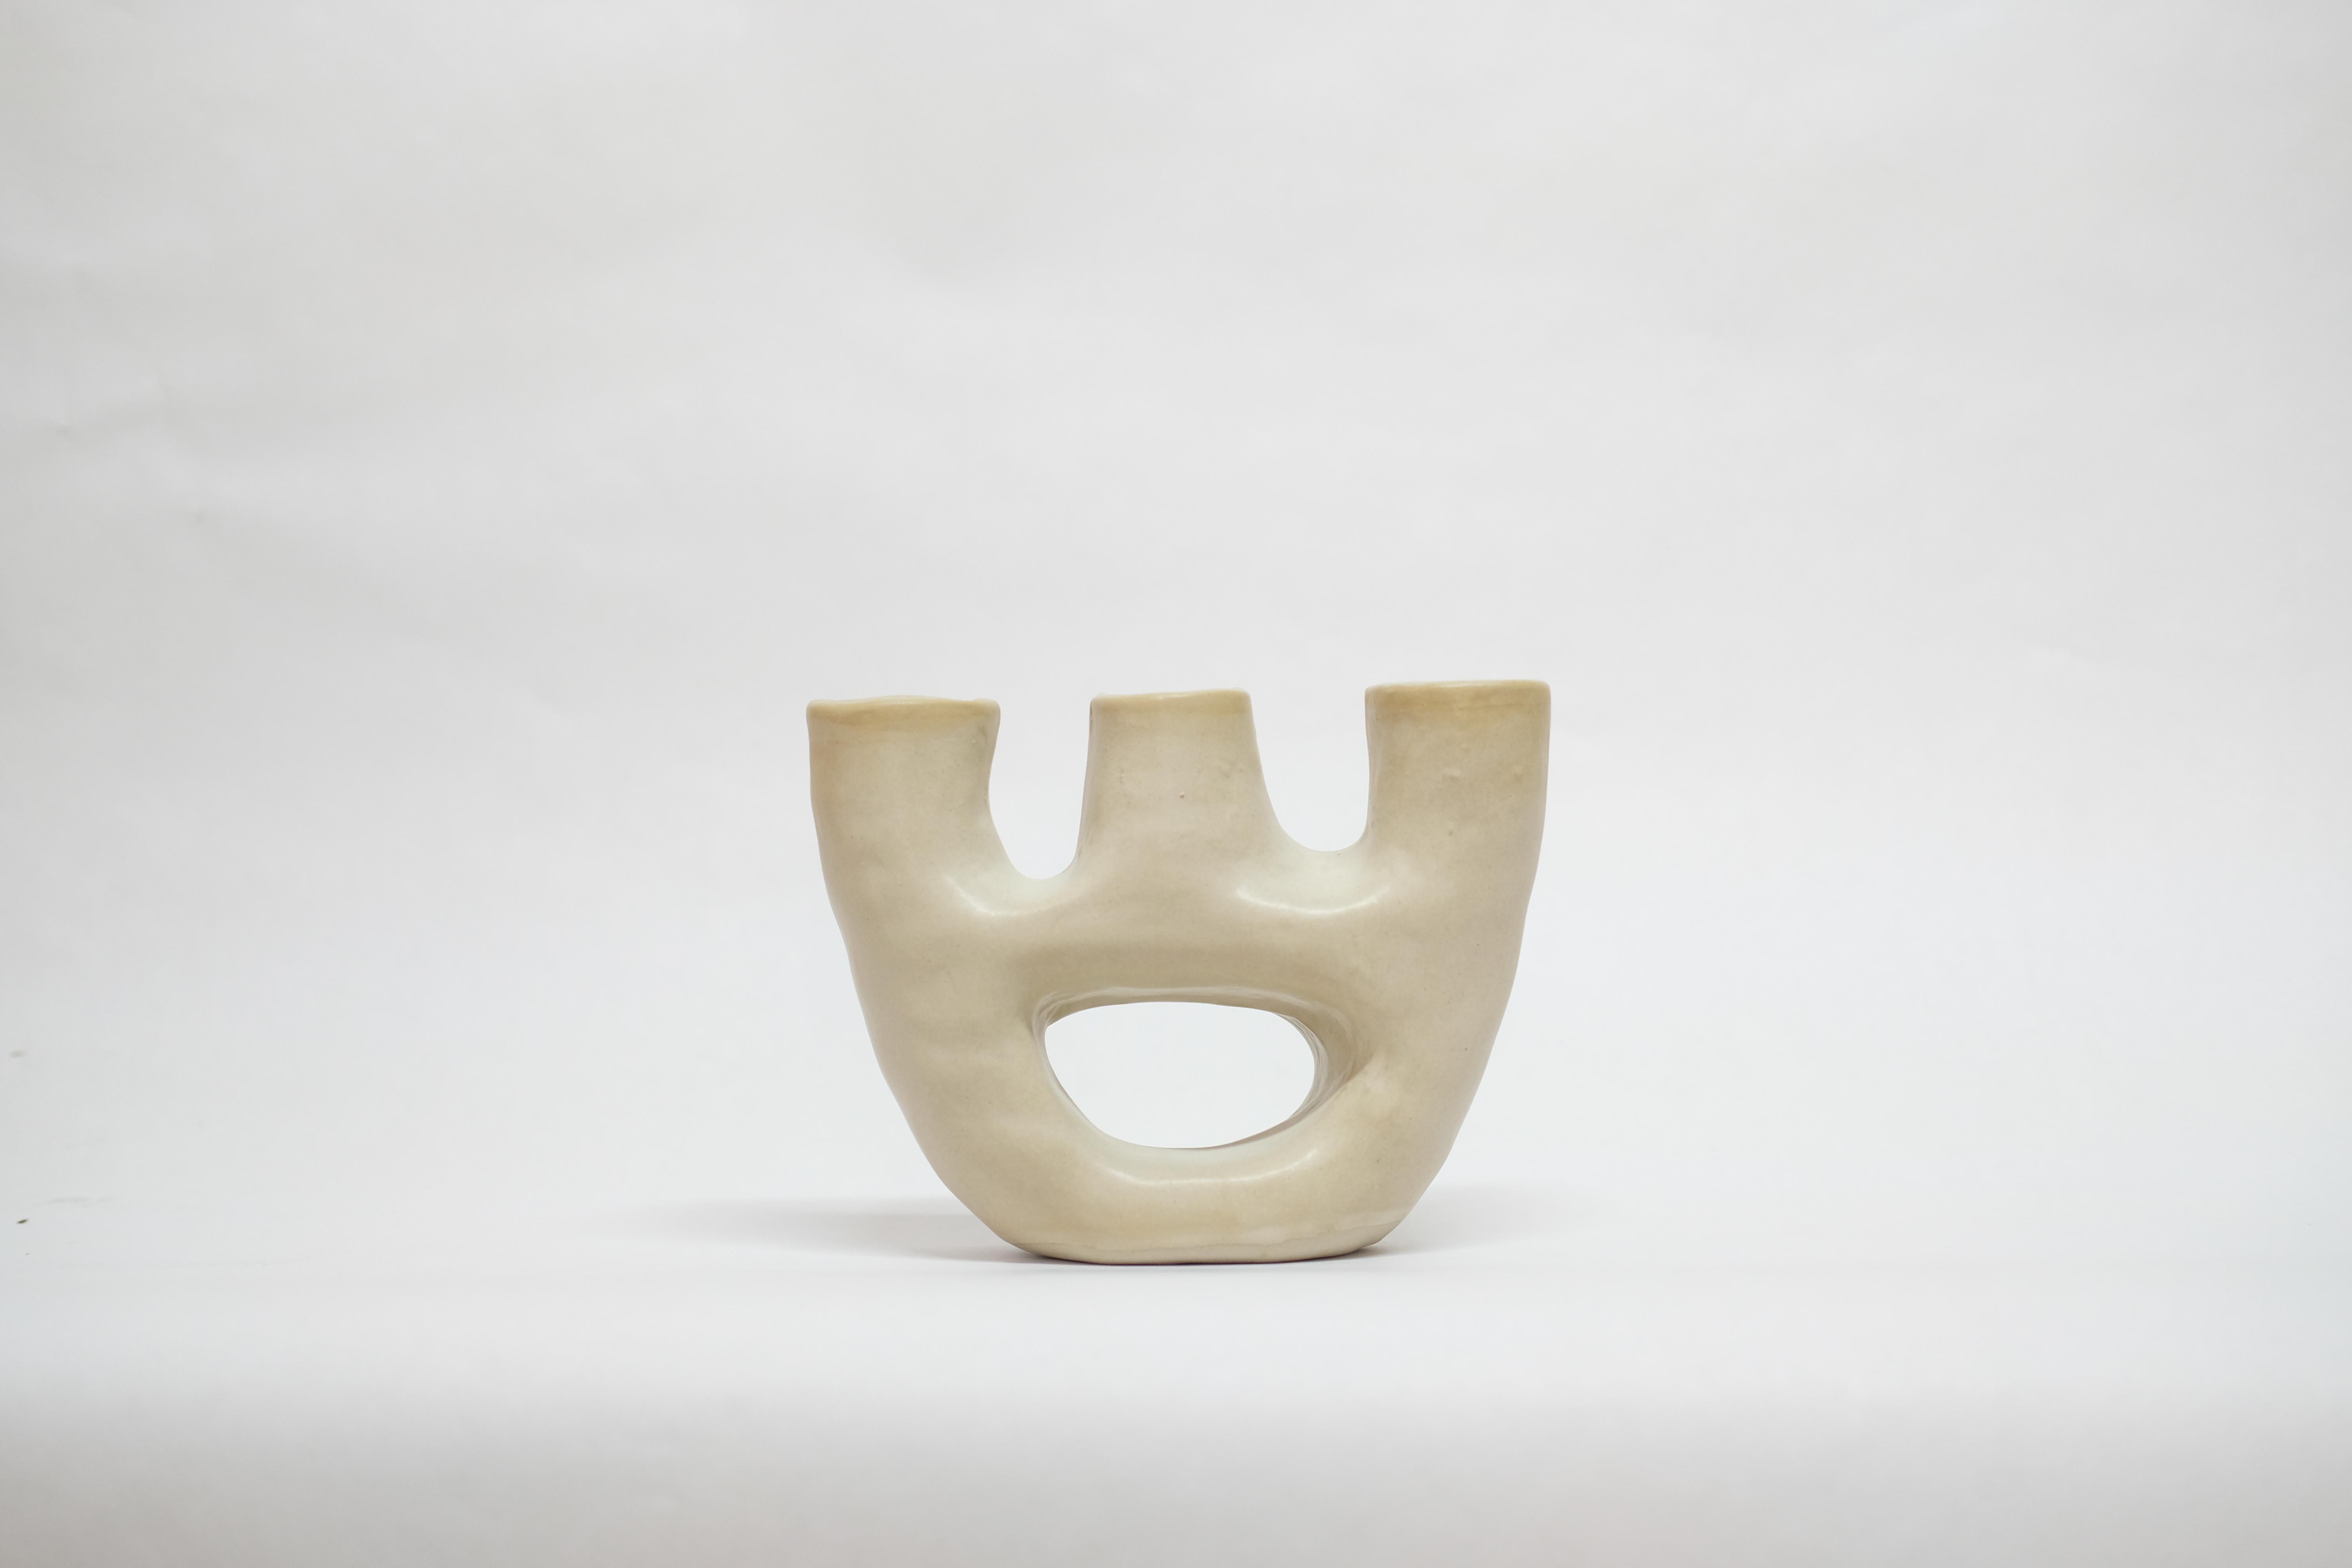 Gravedad stoneware vase by Camila Apaez
One of a kind
Materials: Stoneware
Dimensions: 16 x 15 x 6 cm
Options: White bone, butter milk

This year has been shaped by the topographies of our homes and the uncertainty of our time. We have found solace